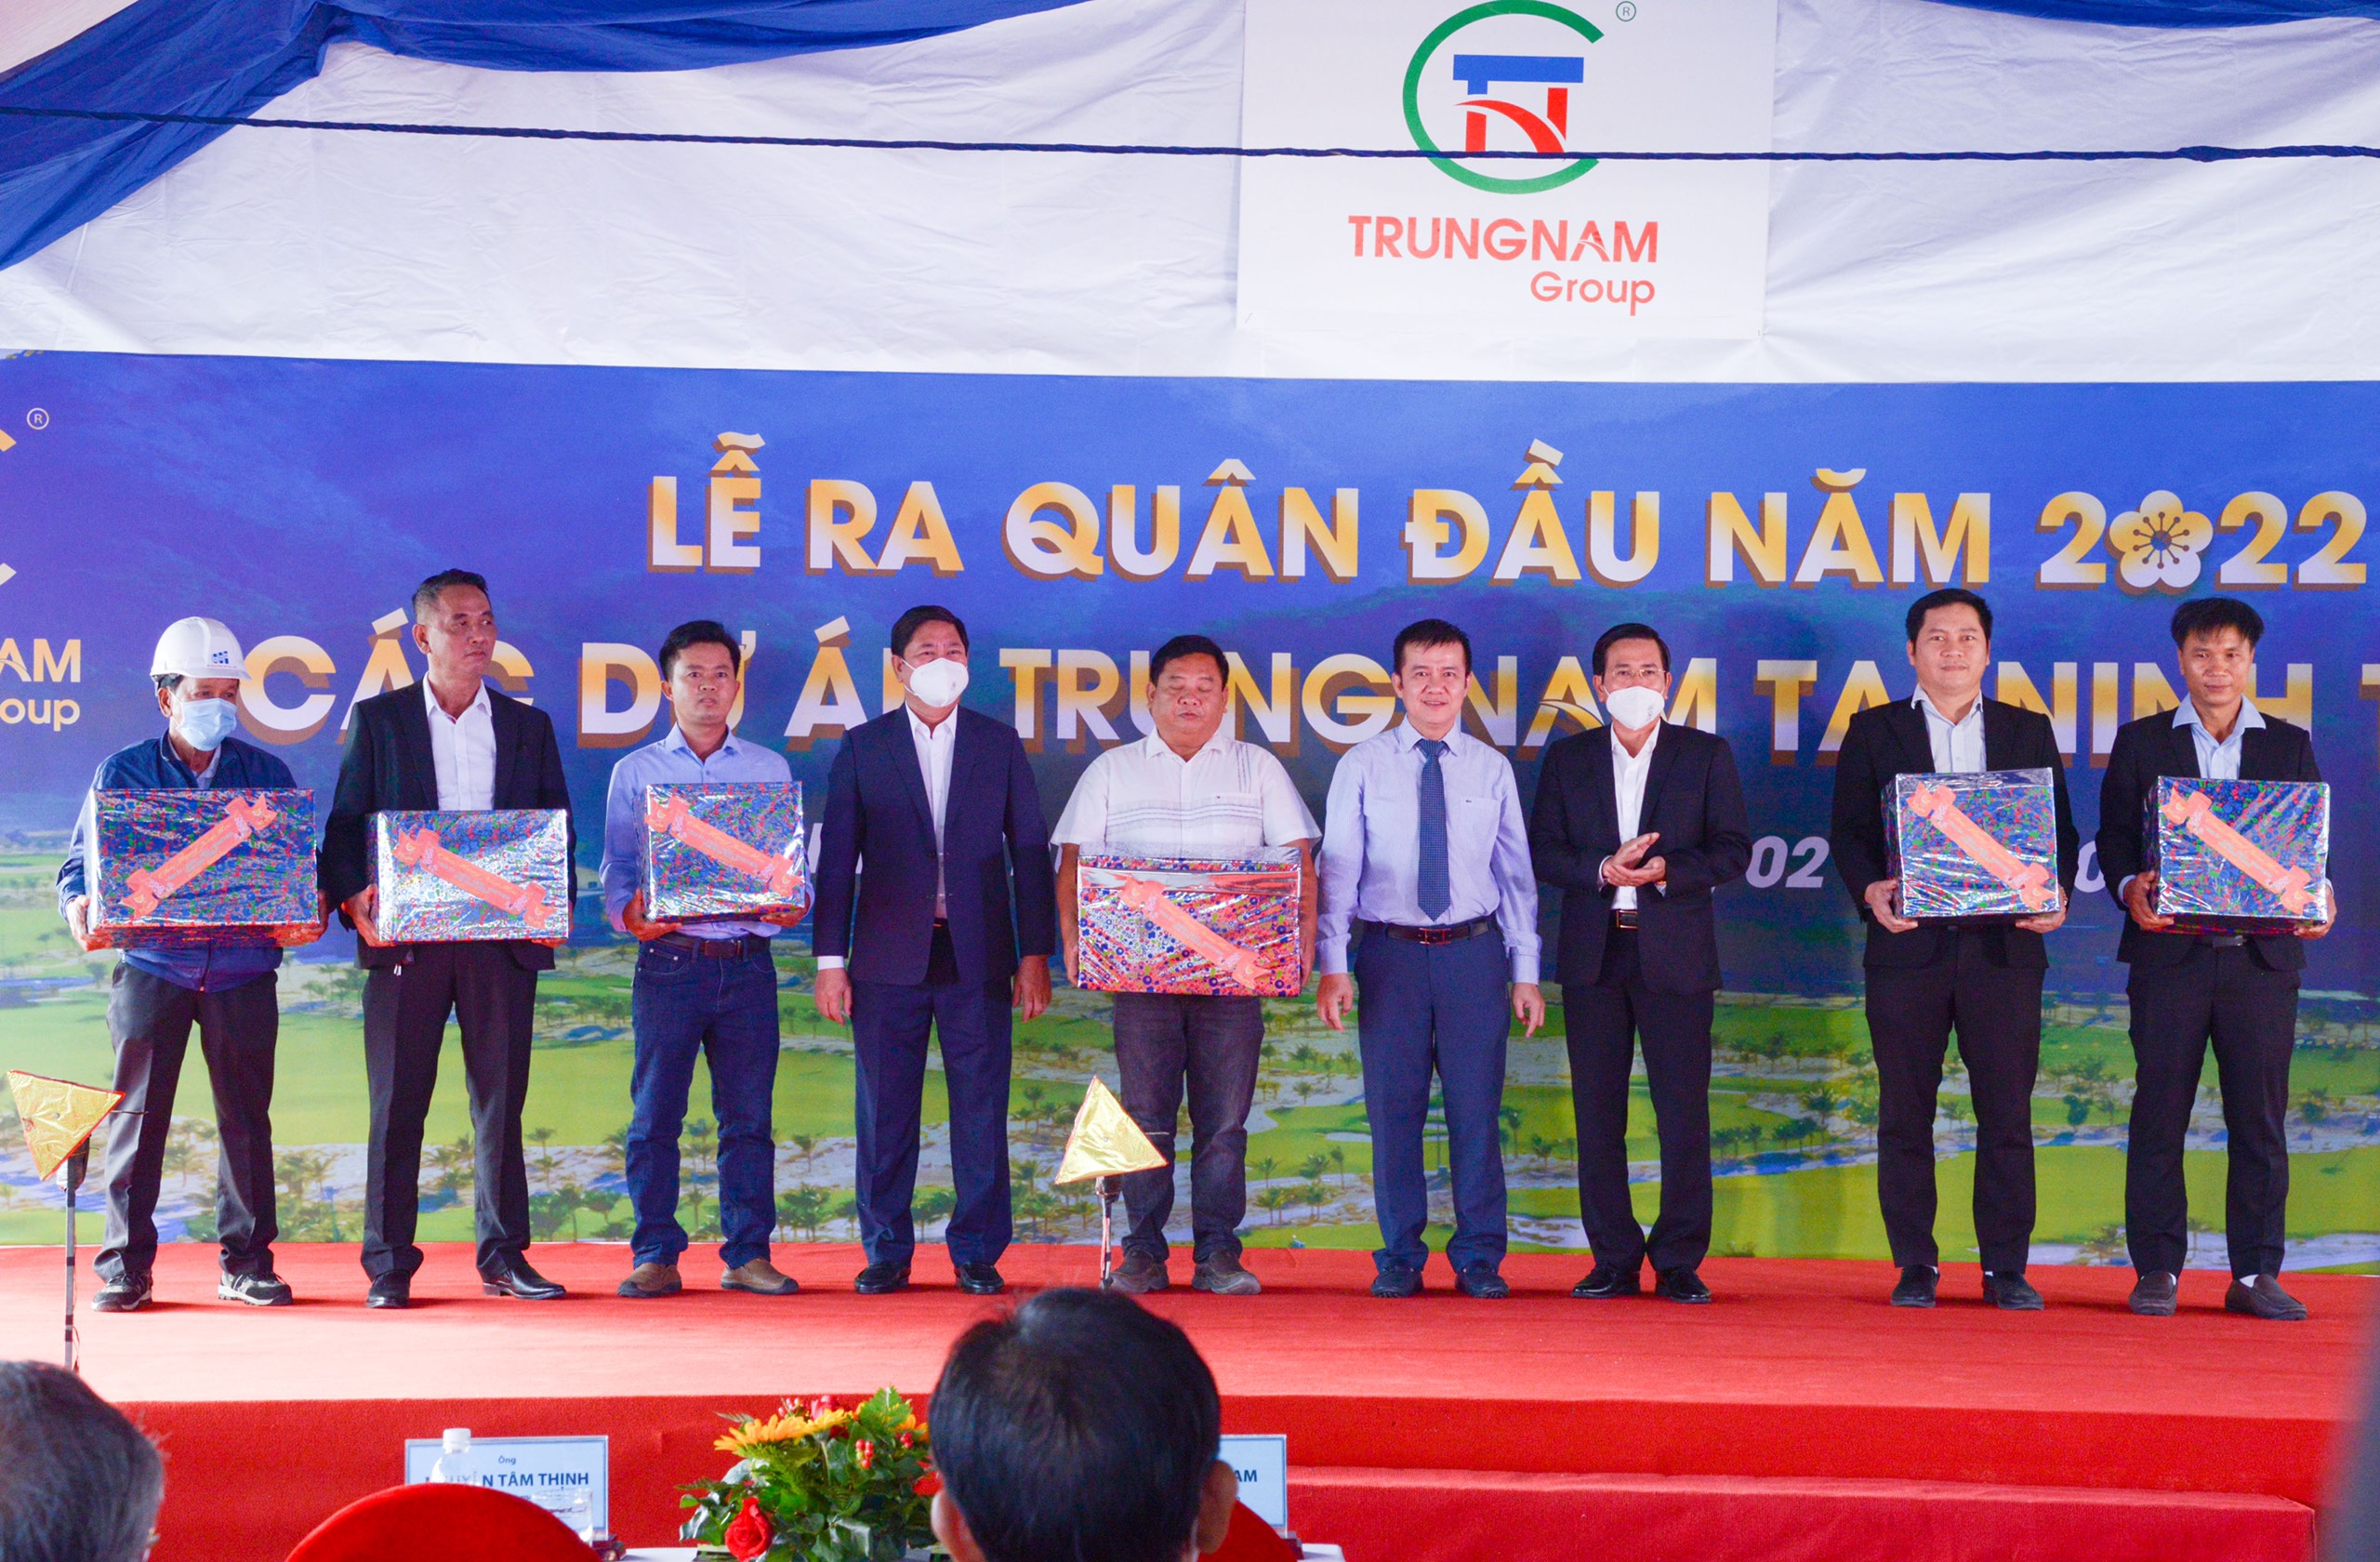 THE 2022 OPENING CEREMONY OF TRUNGNAM GROUP IN BINH TIEN